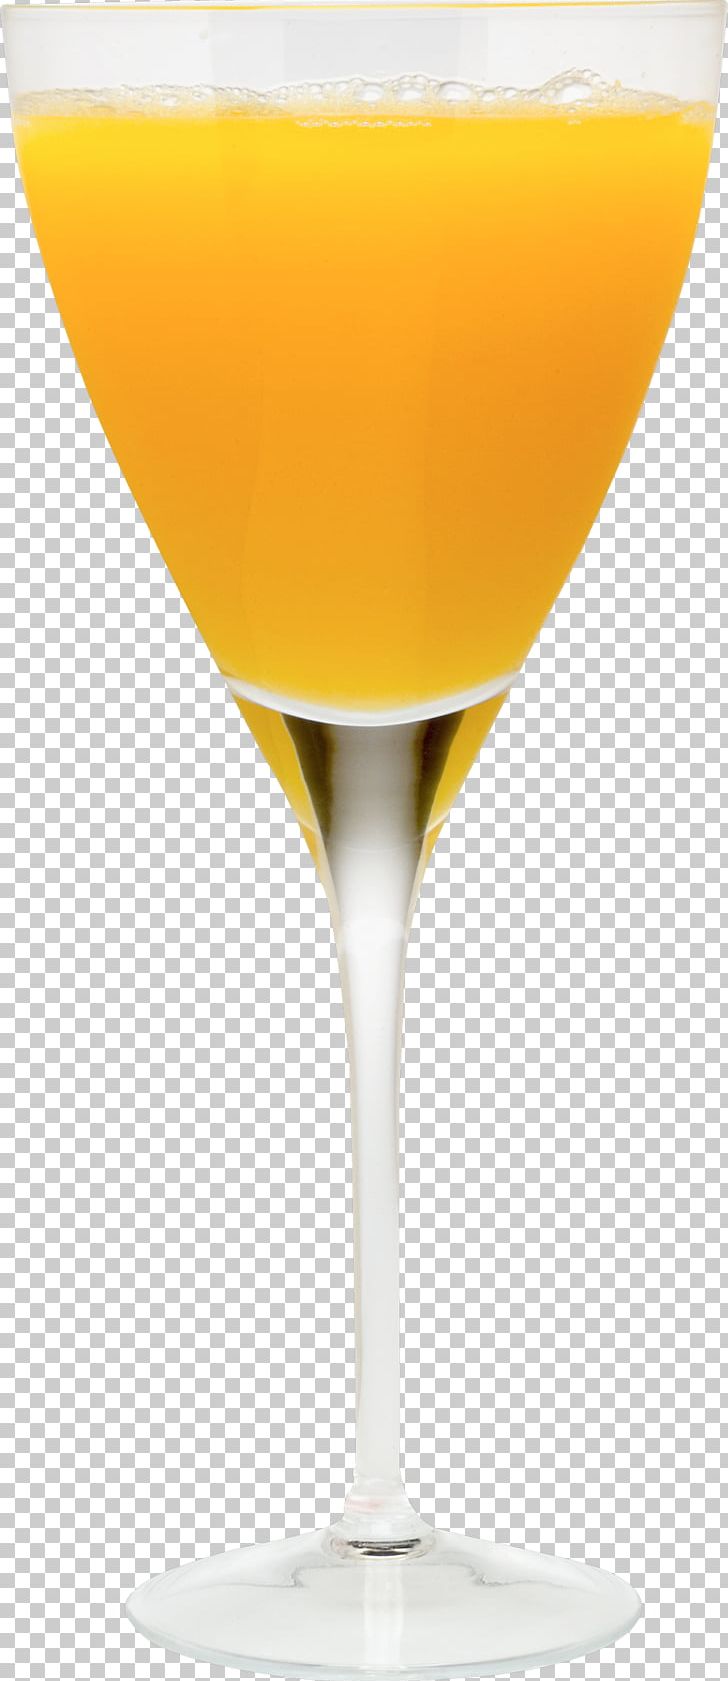 Orange Juice Cocktail Non-alcoholic Drink Fizzy Drinks PNG, Clipart, Bellini, Blood And Sand, Champagne Stemware, Classic Cocktail, Cocktail Free PNG Download